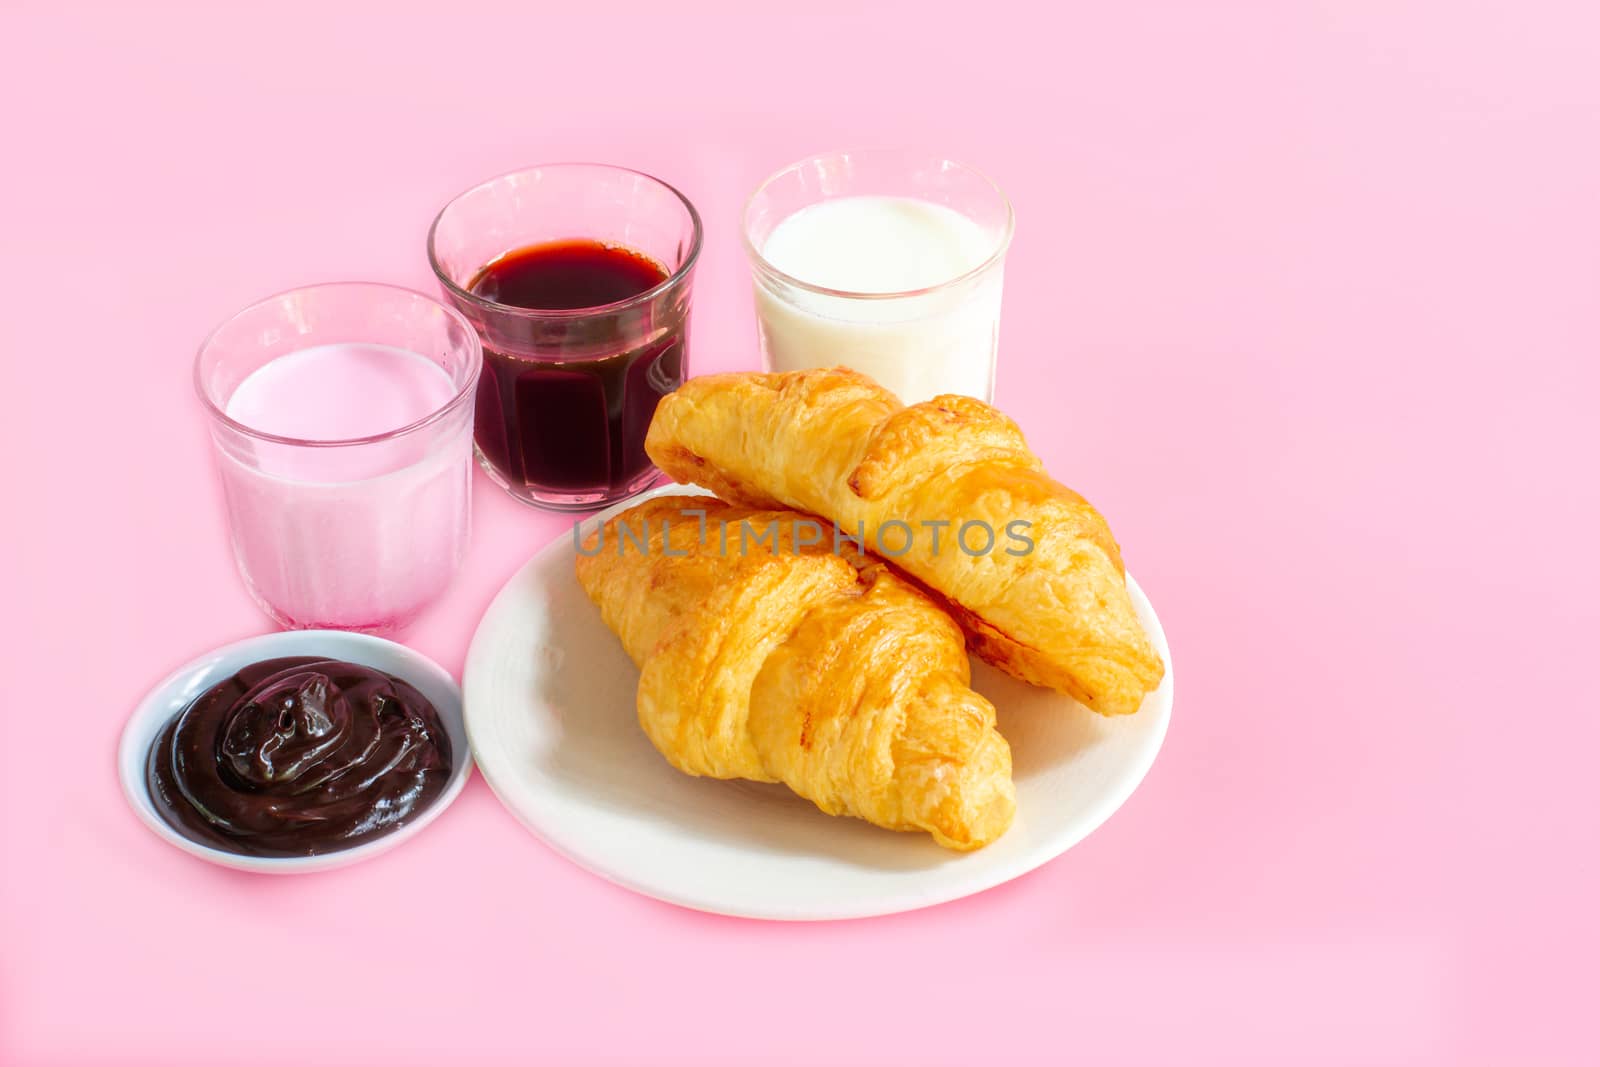 croissants served with glass of Fresh milk, coffee on pink background. Breakfast concept.